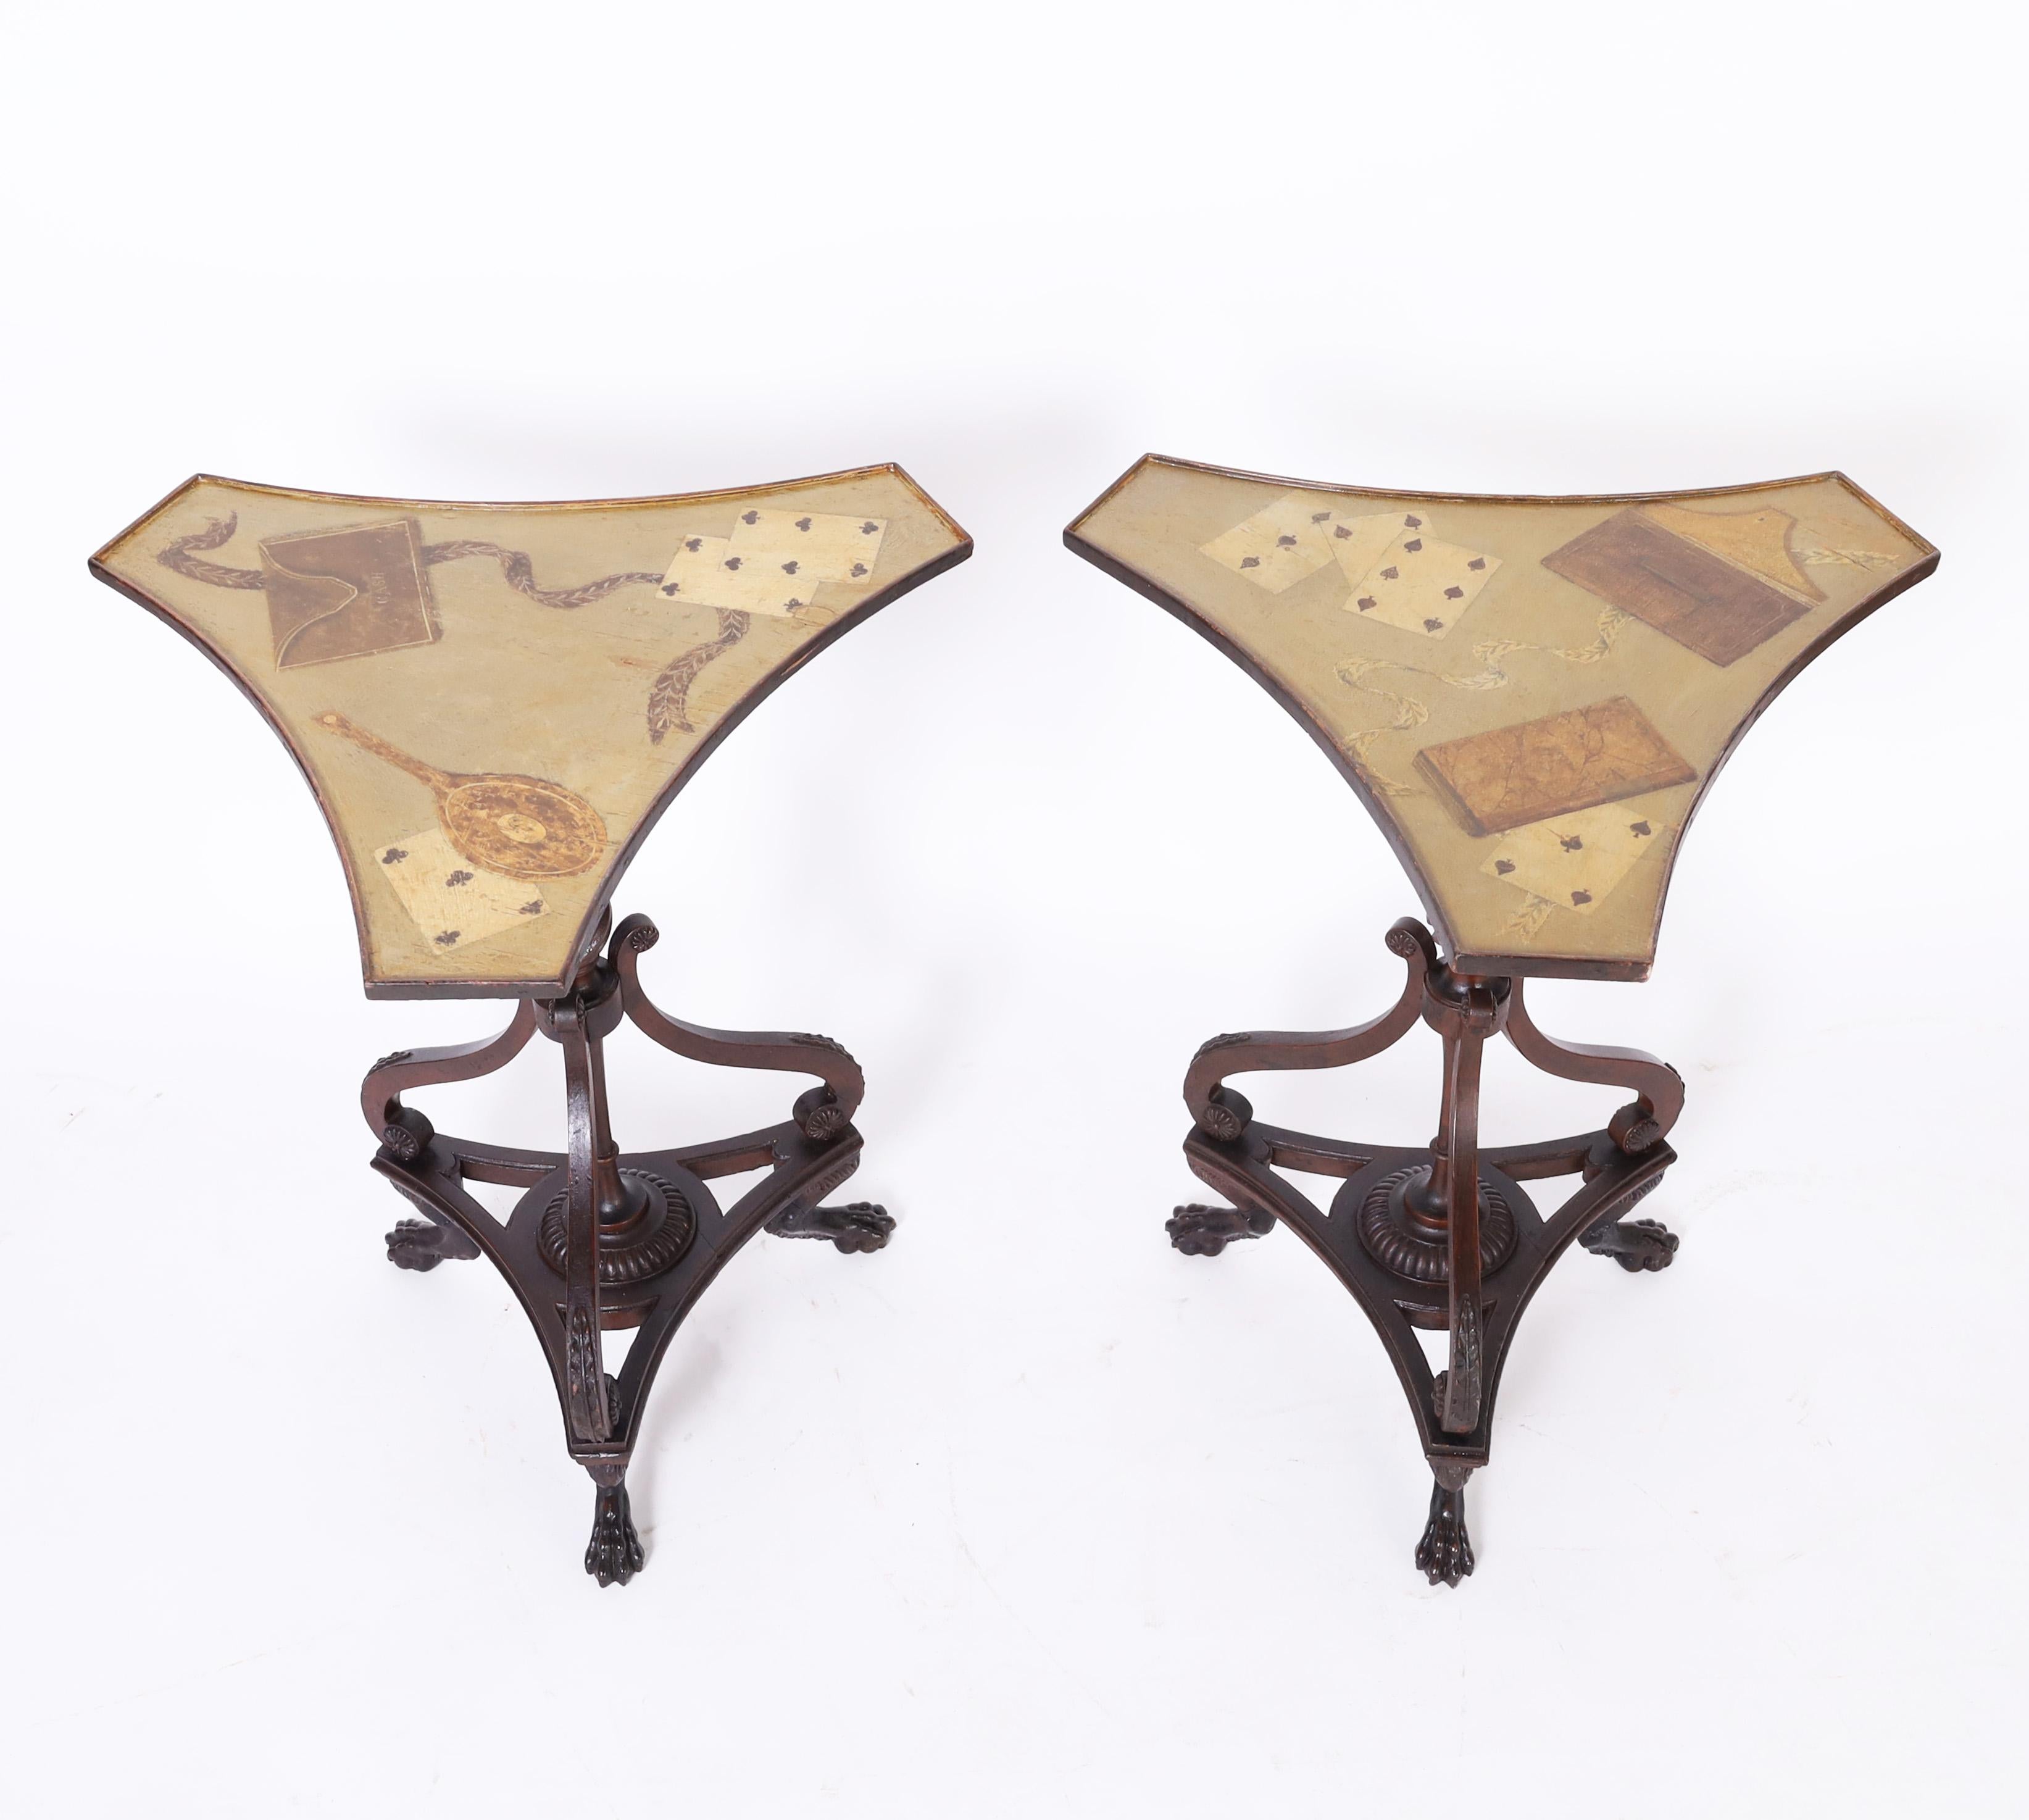 Handsome pair of antique regency style stands featuring Tromp L'oeil tops with playing cards and wallets over classical bases with turned pedestals, cabriole brackets with acanthus leaves and paw feet.